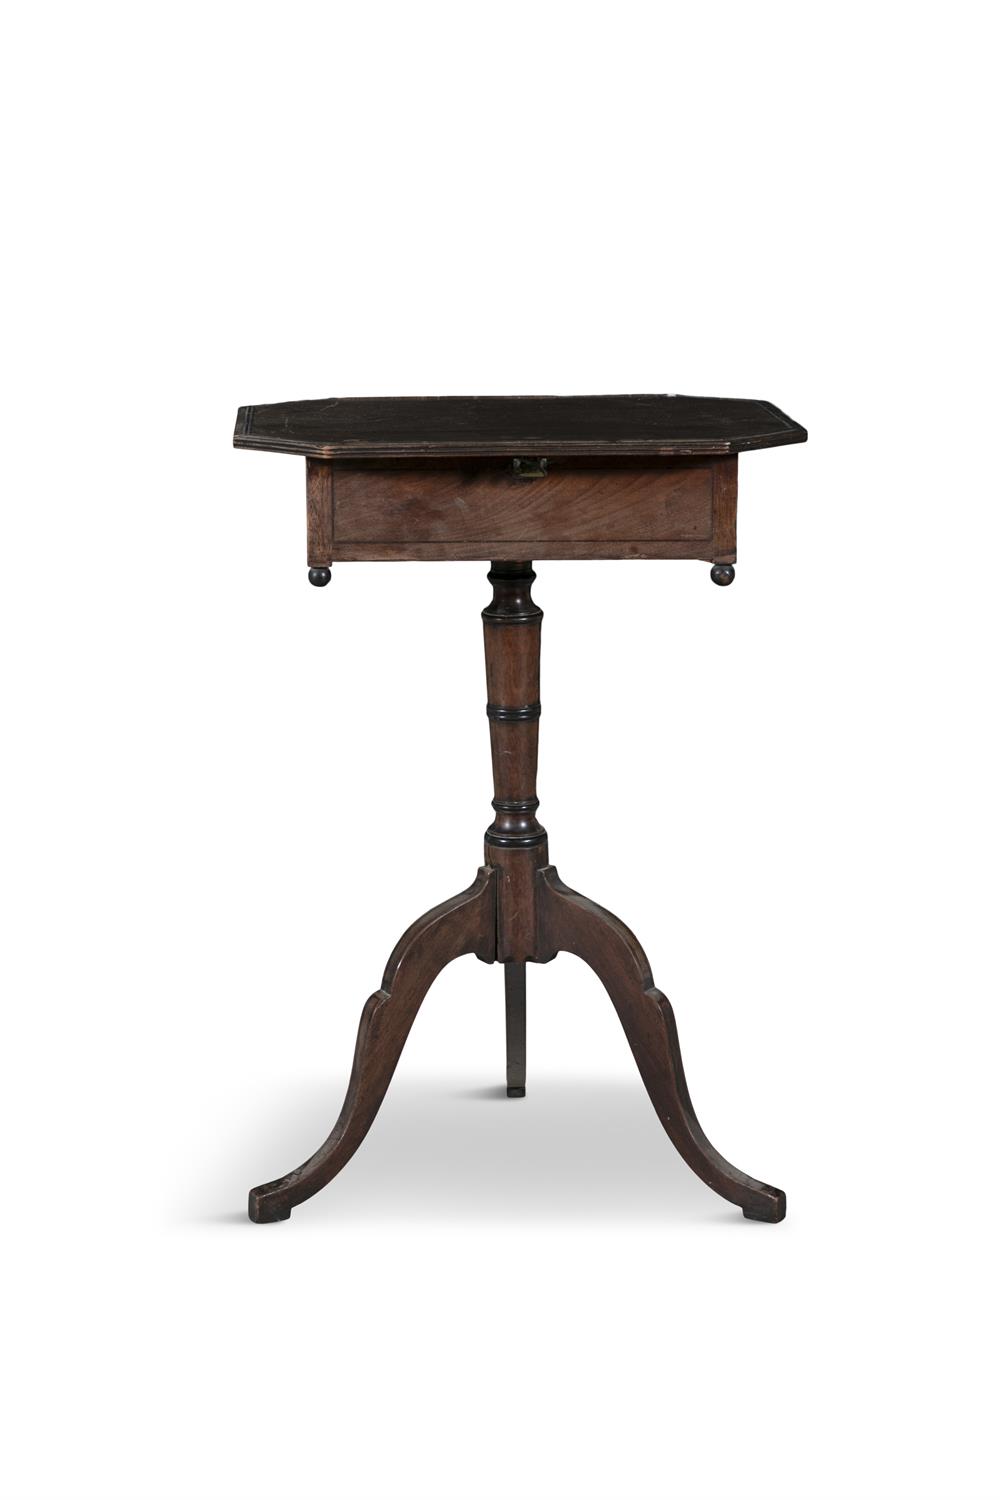 A MAHOGANY READING TABLE, ENGLISH 19TH CENTURY, the top with low moulded gallery and canted